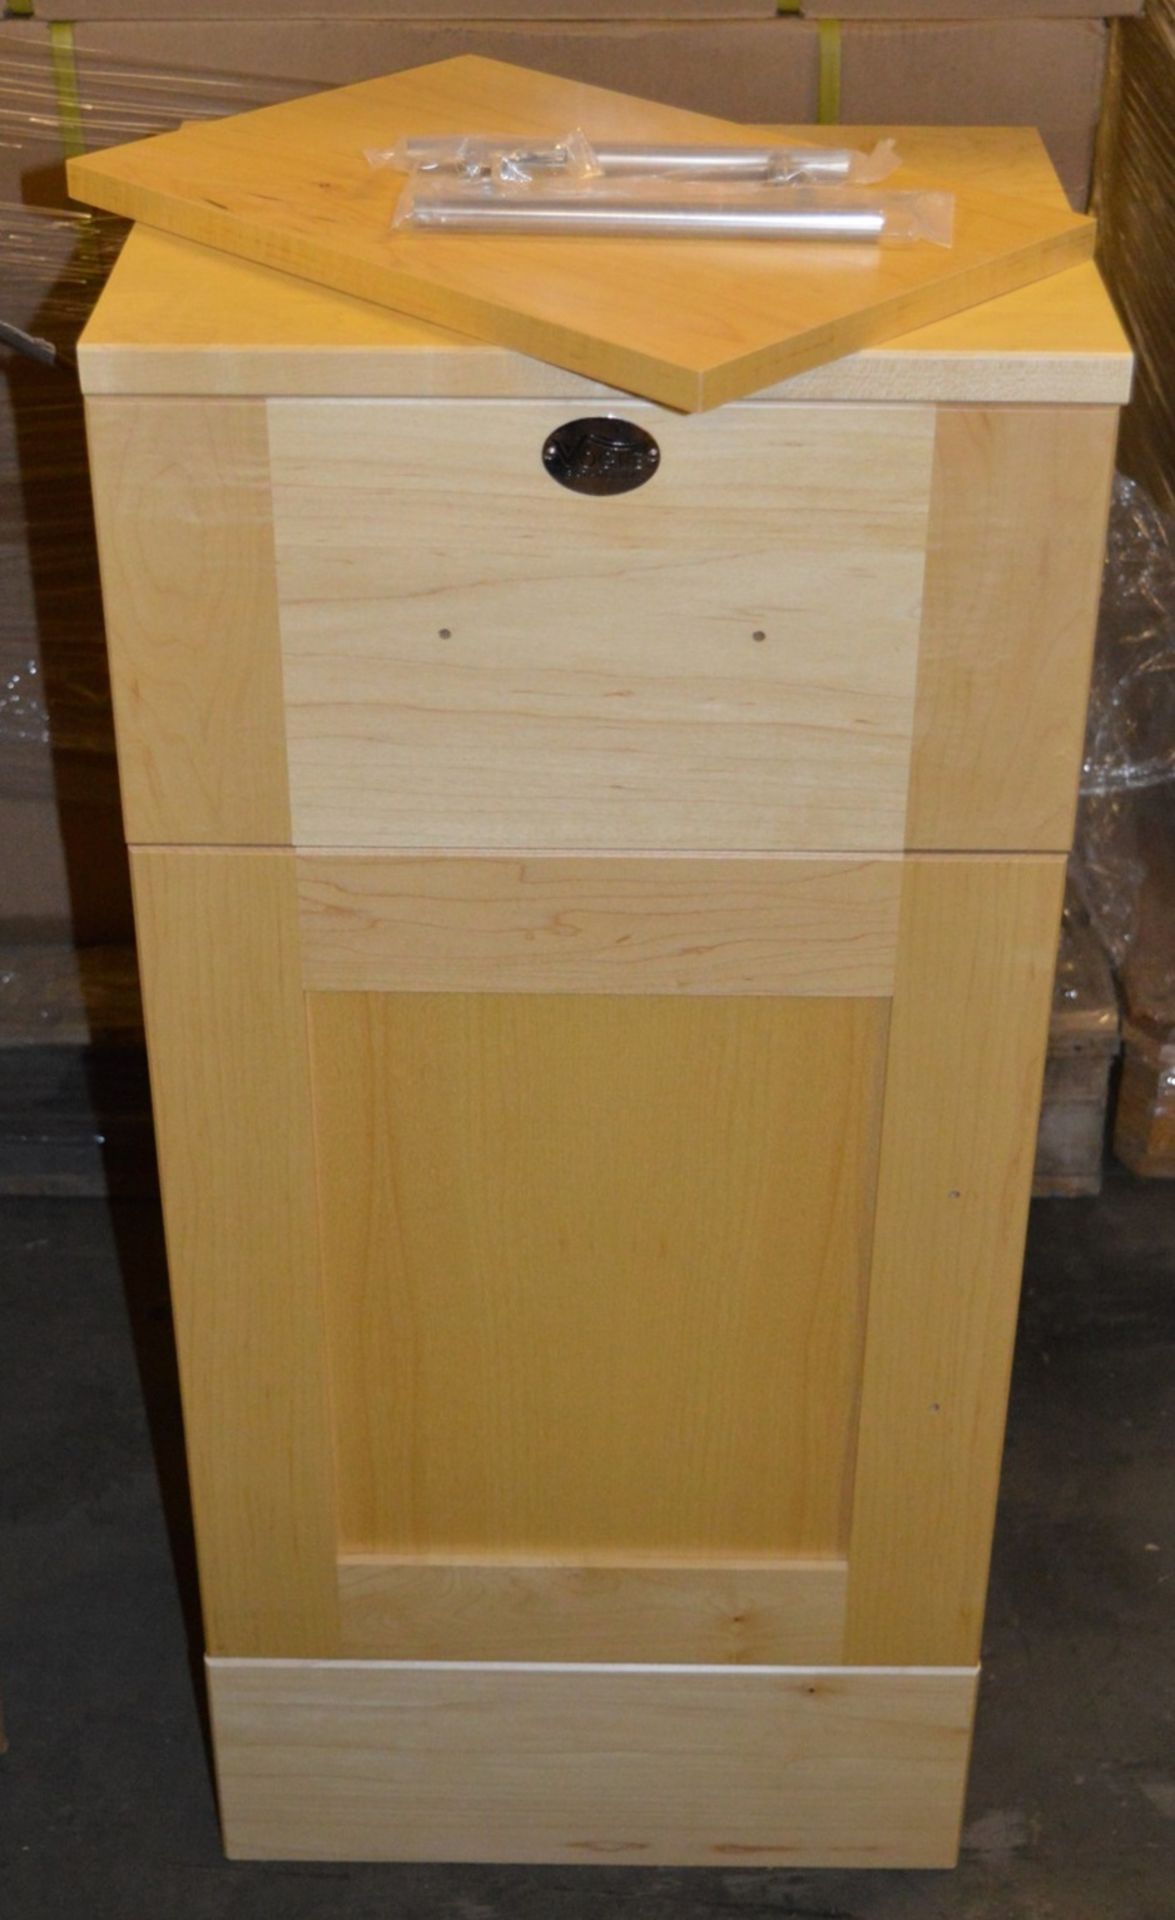 1 x Vogue Bathrooms KUDOS Bathroom Storage Cabinet - 400mm Width - Maple Shaker Style - CL034 - - Image 2 of 8